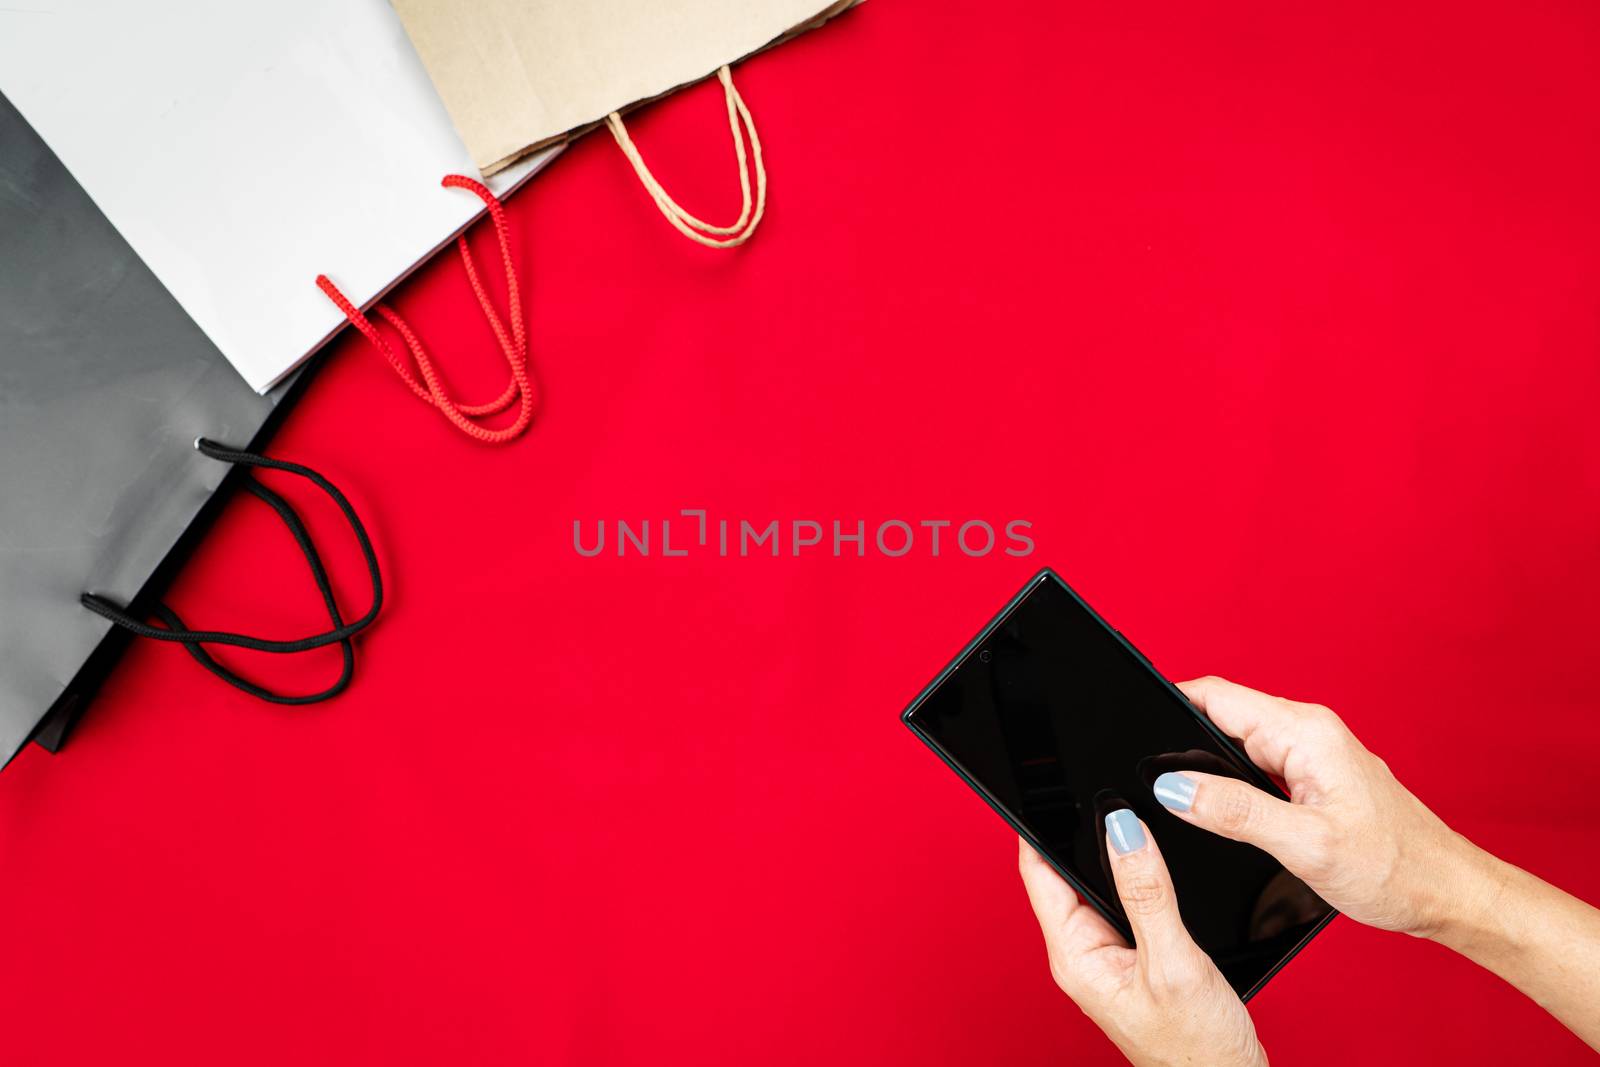 black friday sale, woman hand online shopping on smartphone with shopping bag on red background